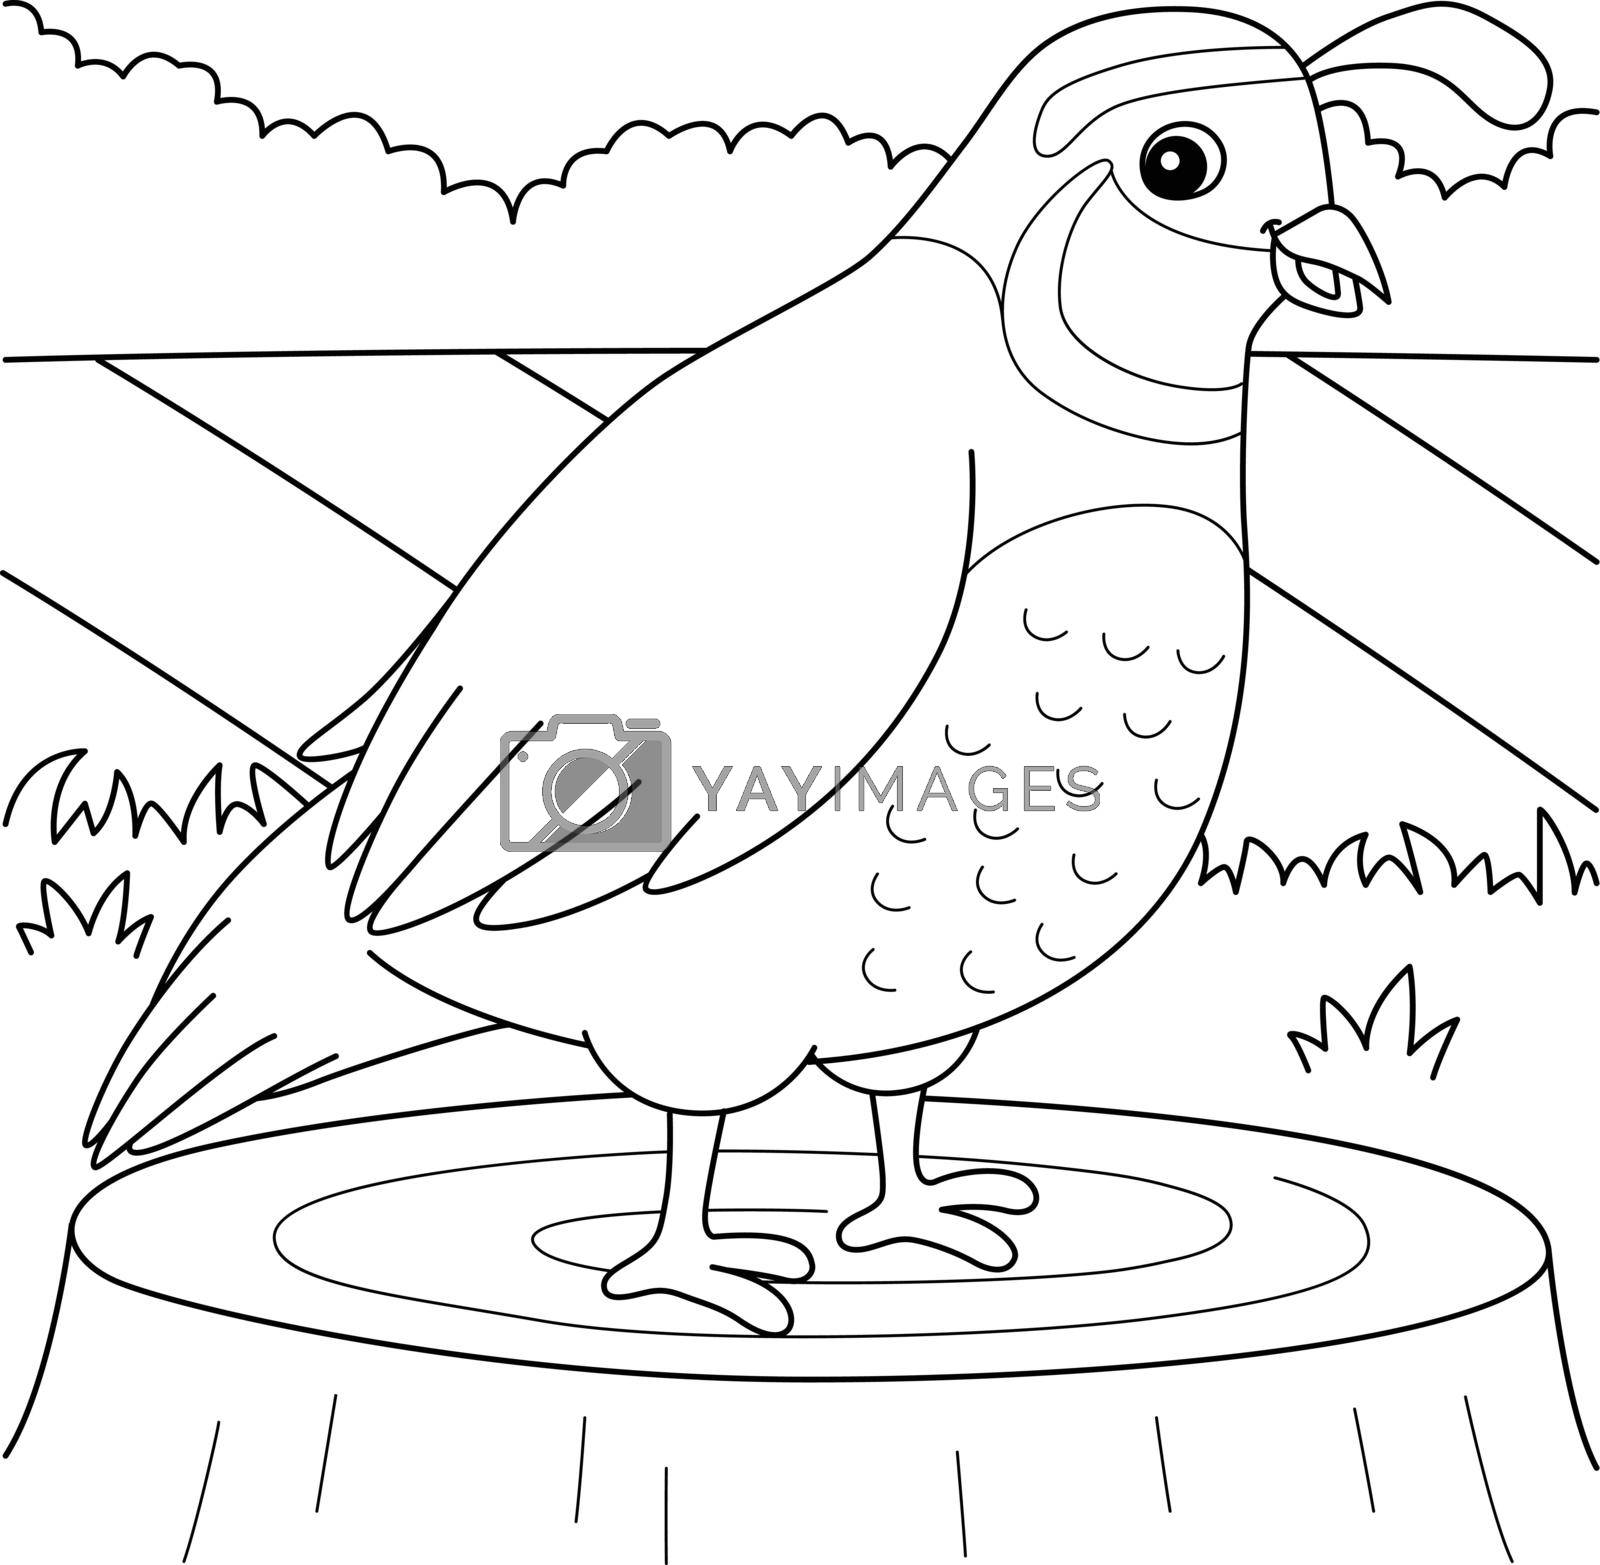 Royalty free image of Quail Animal Coloring Page for Kids by abbydesign